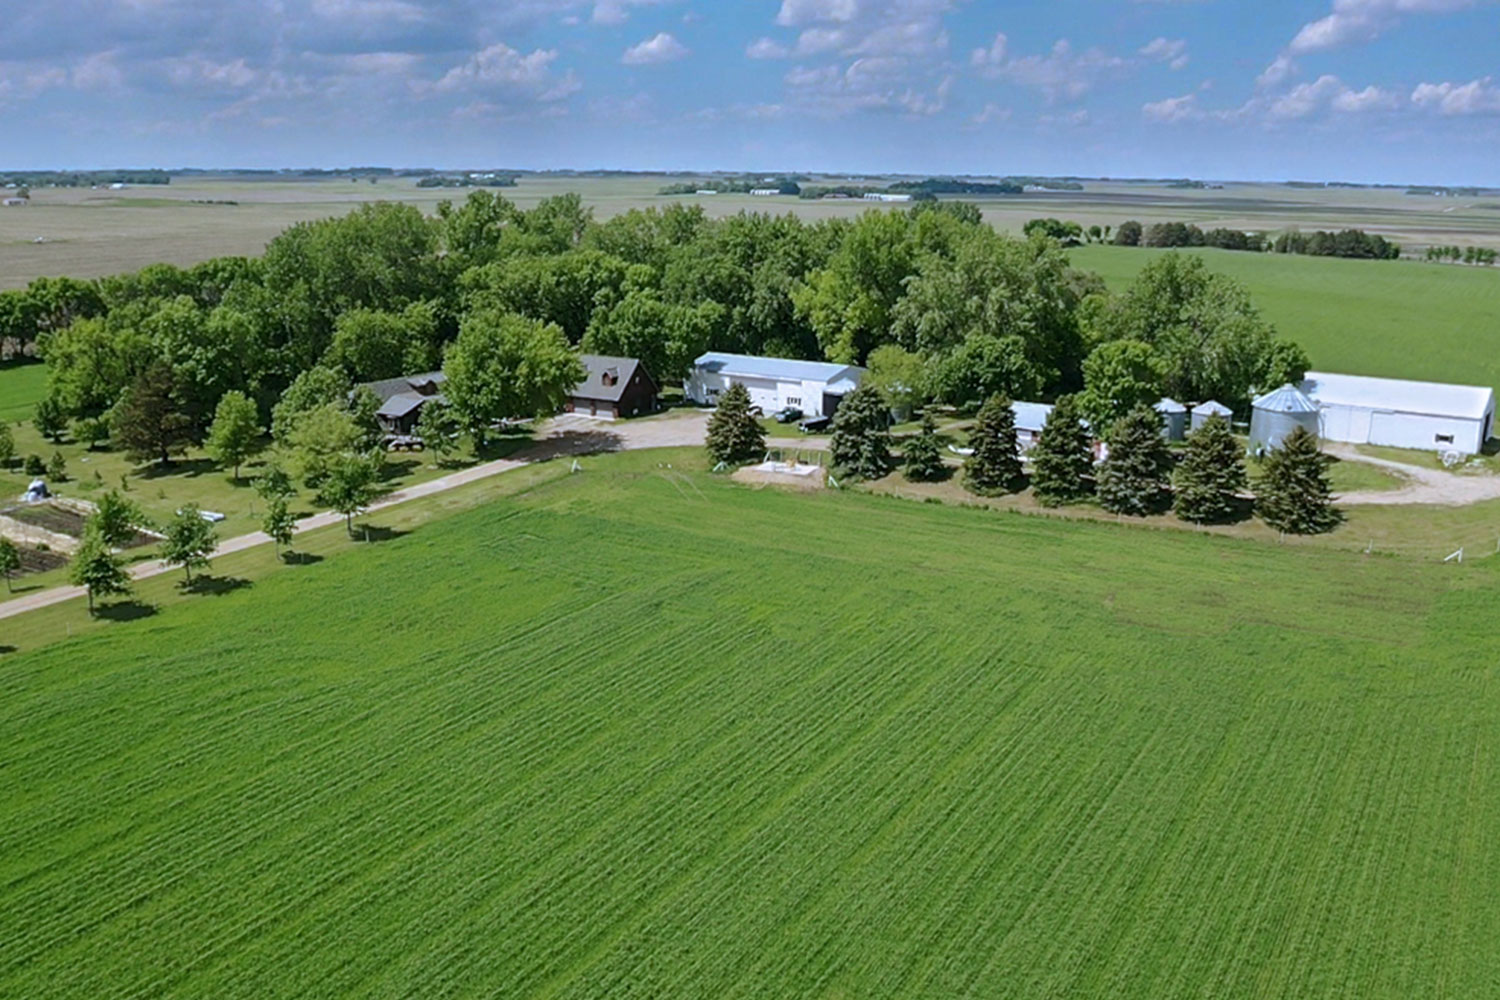 Aerial view of farm's field, lined by trees